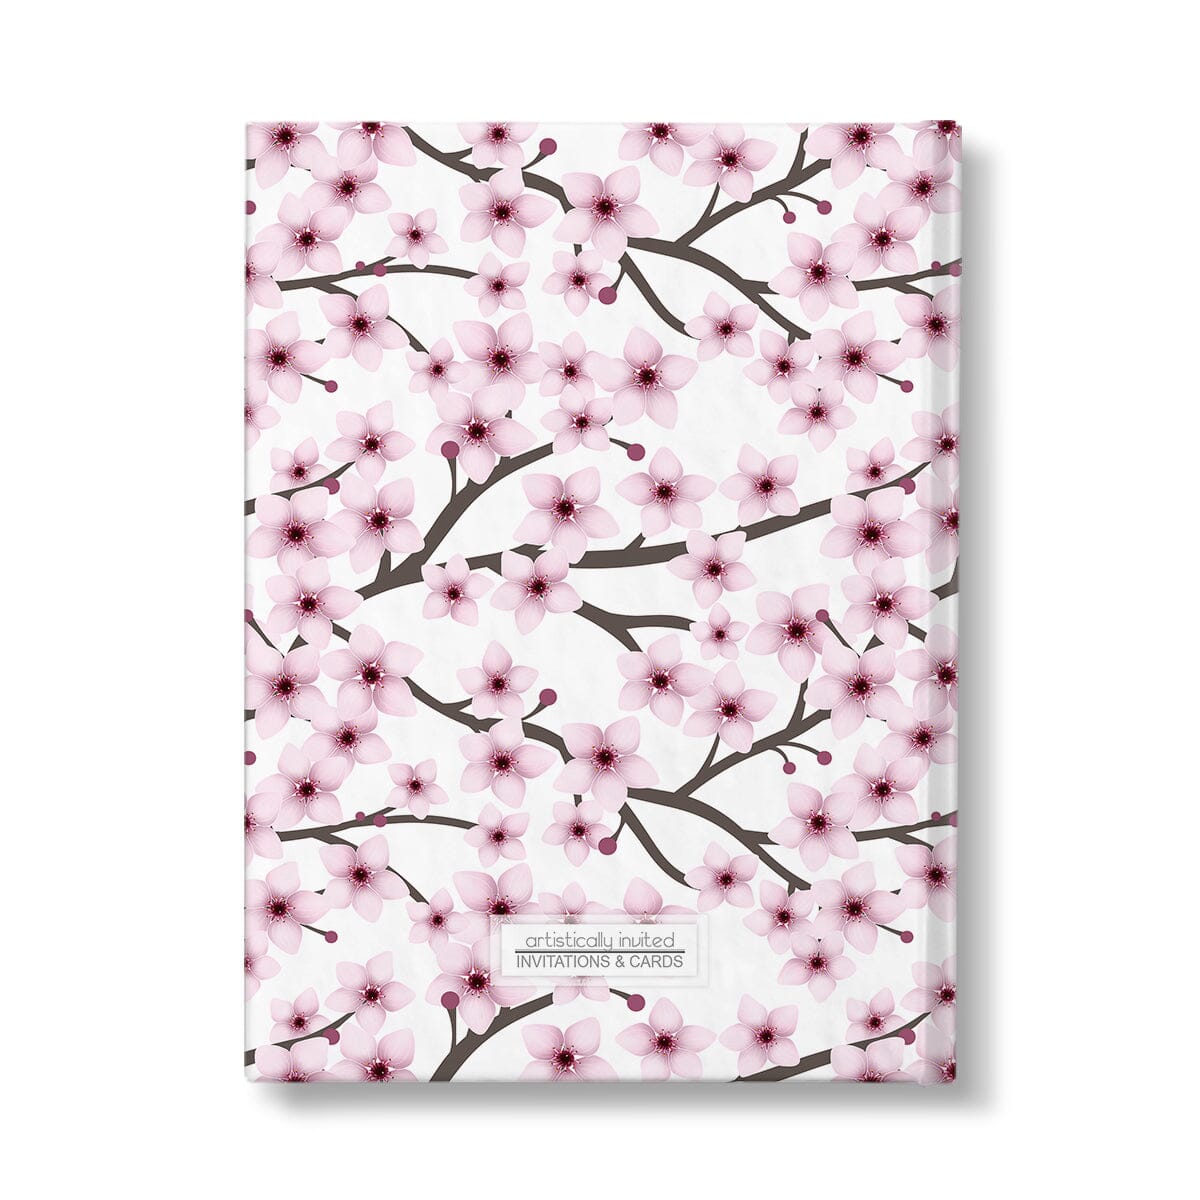 Personalized Cherry Blossom Journal at Artistically Invited. Back side of journal.